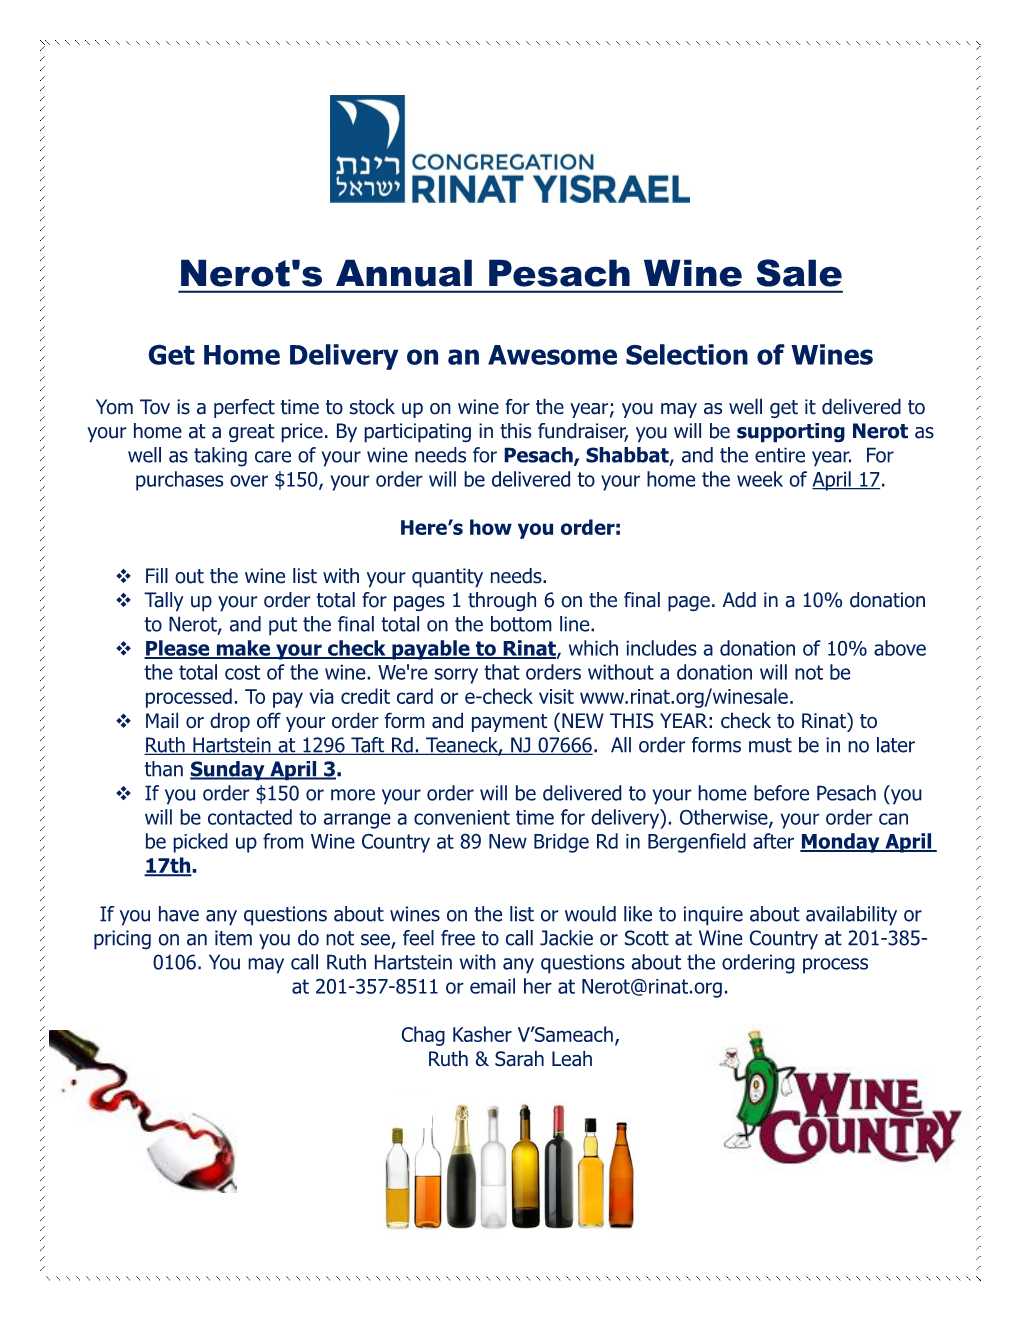 Nerot's Annual Pesach Wine Sale